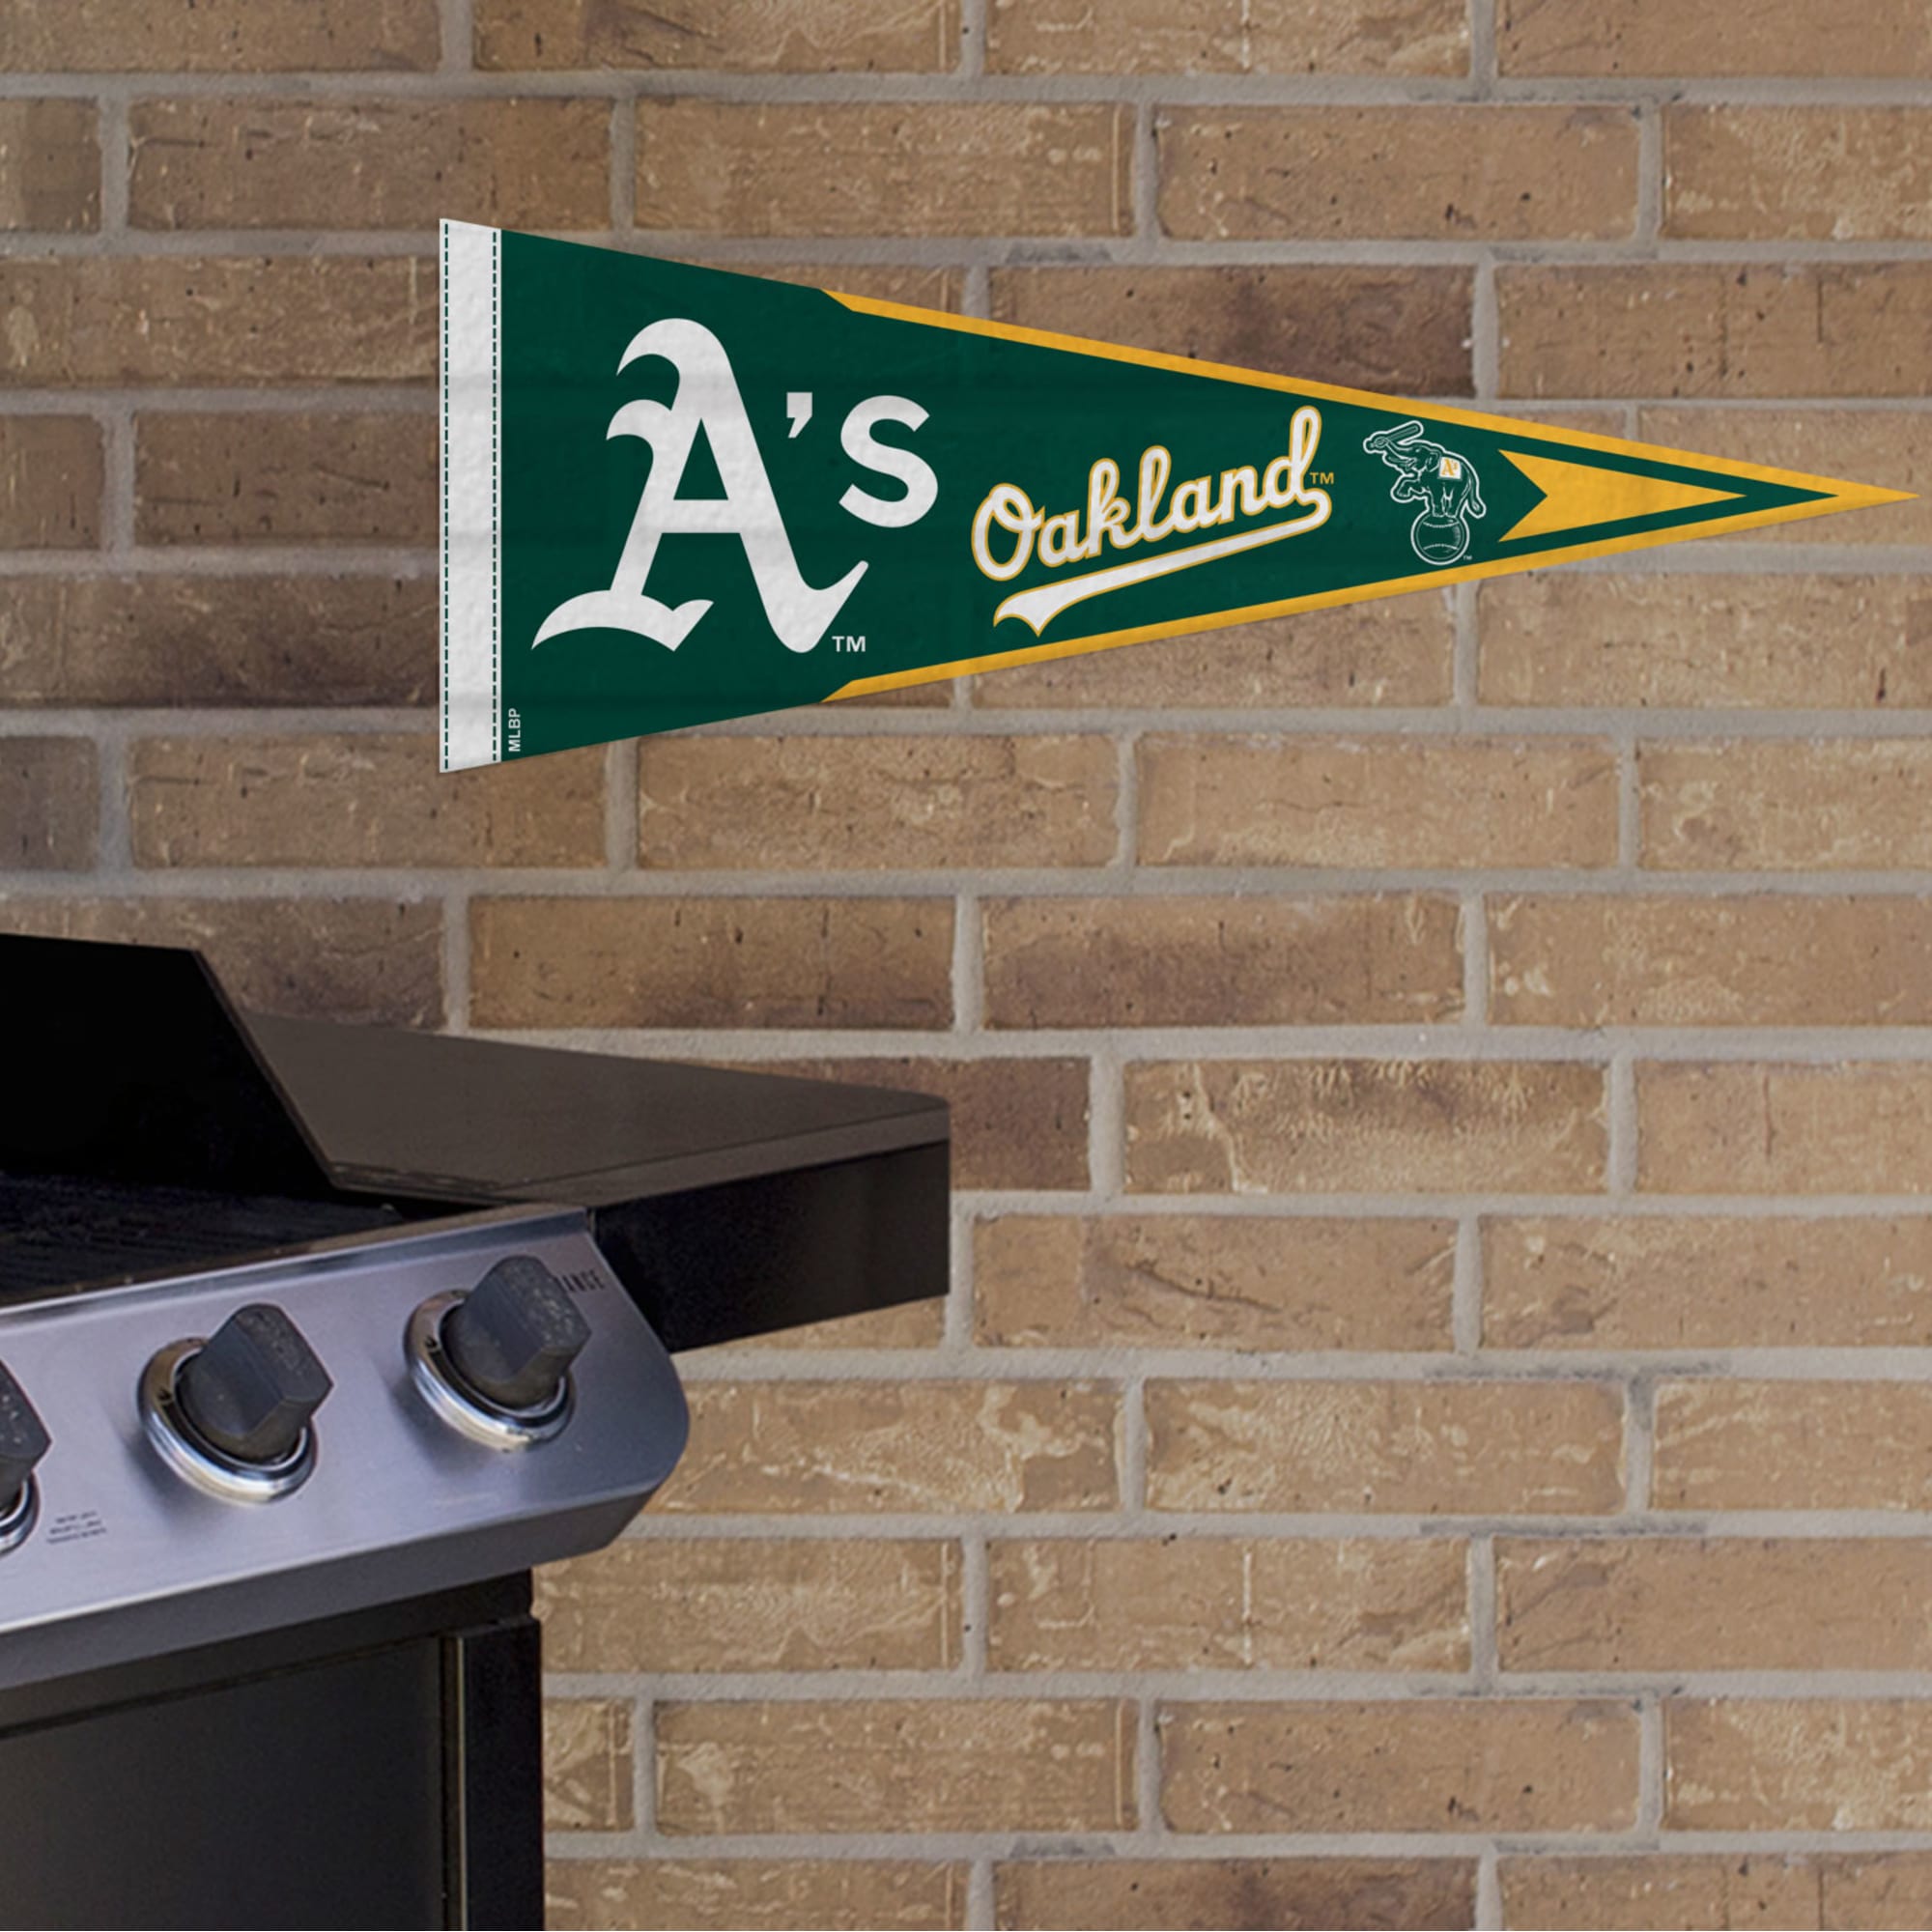 Oakland Athletics: Pennant - Officially Licensed MLB Outdoor Graphic 24.0"W x 9.0"H by Fathead | Wood/Aluminum